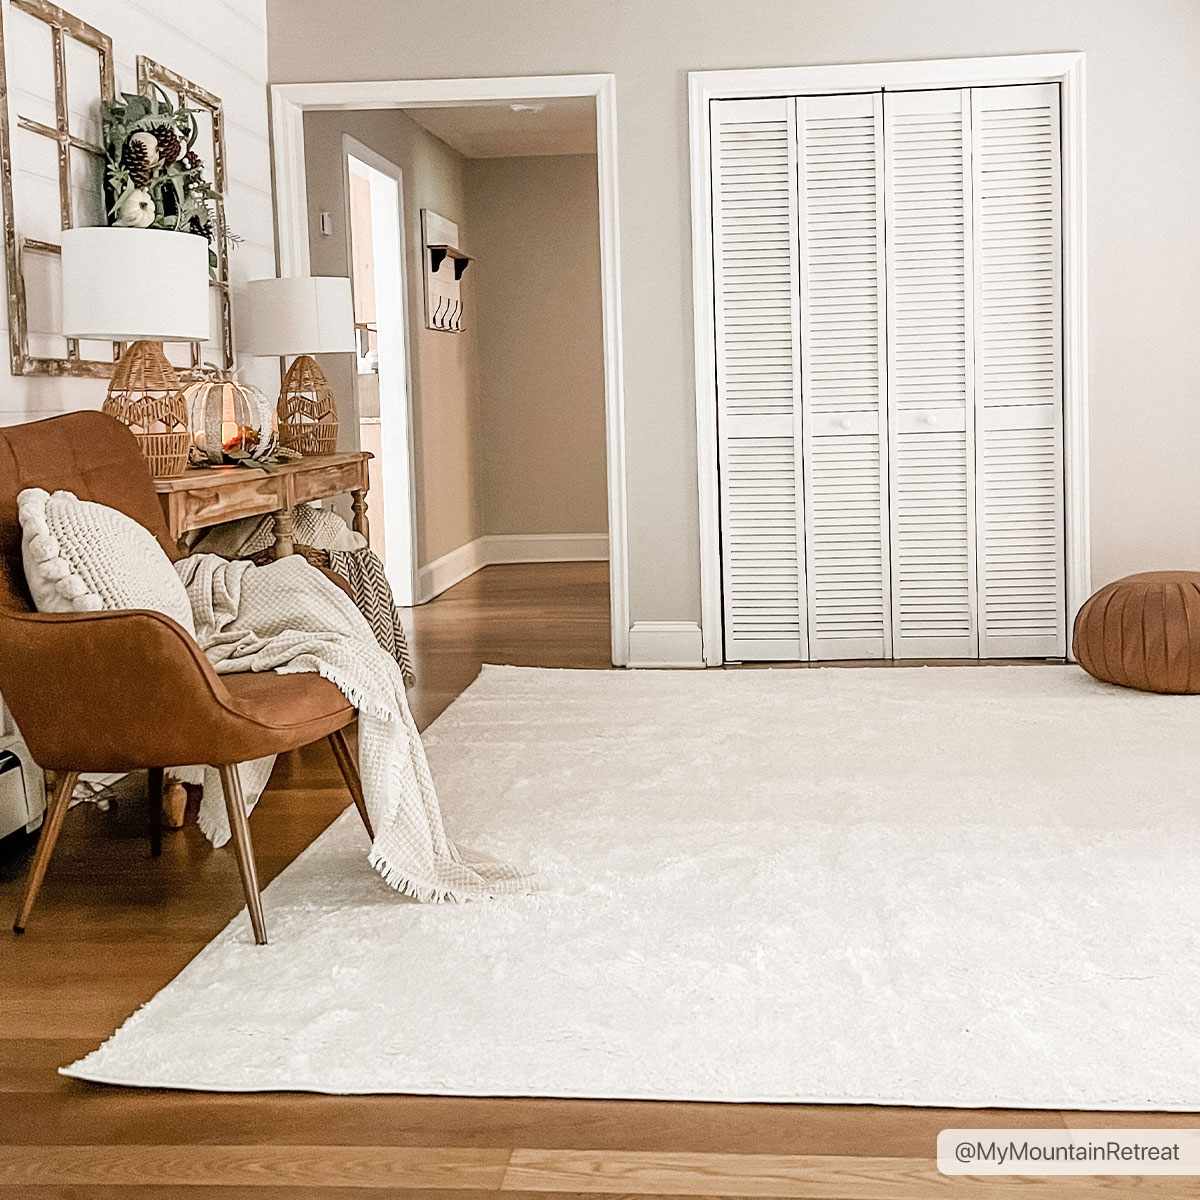 Backing for Handmade Rugs: Keep Your Rugs From Slipping